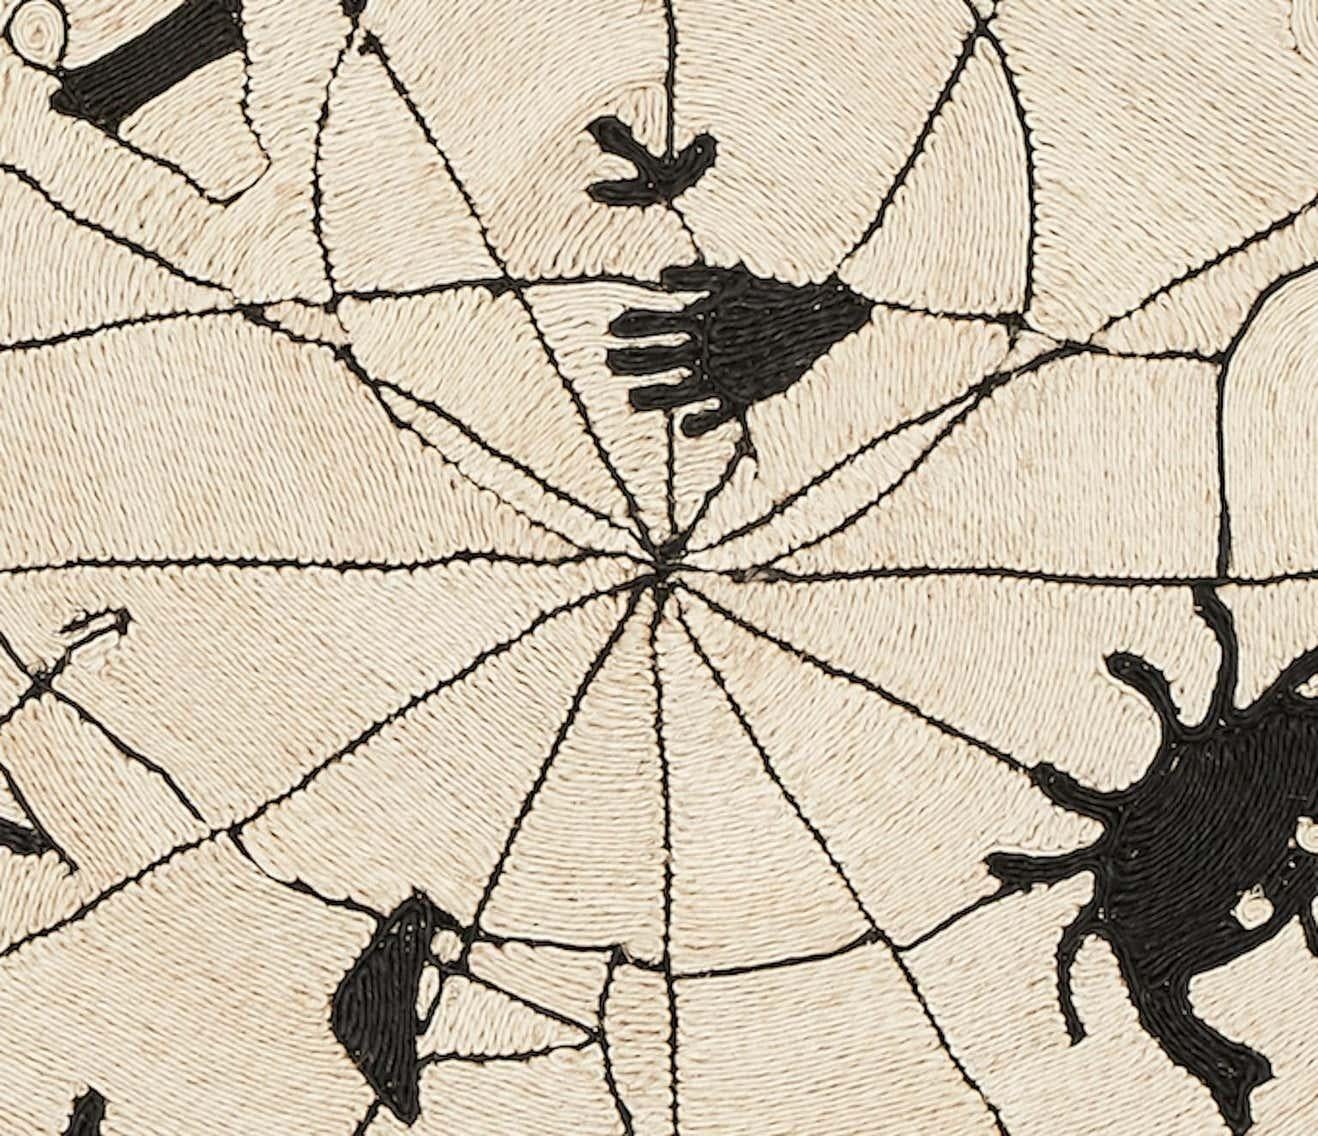 The Charlap Hyman & Herrero rug collection consists of an enchanting group of whimsical, figurative designs with a cerebral edge. With astrological symbols, Alexander Calder-inspired animal forms and Latin proverbs rendered in hand-coiled abaca,